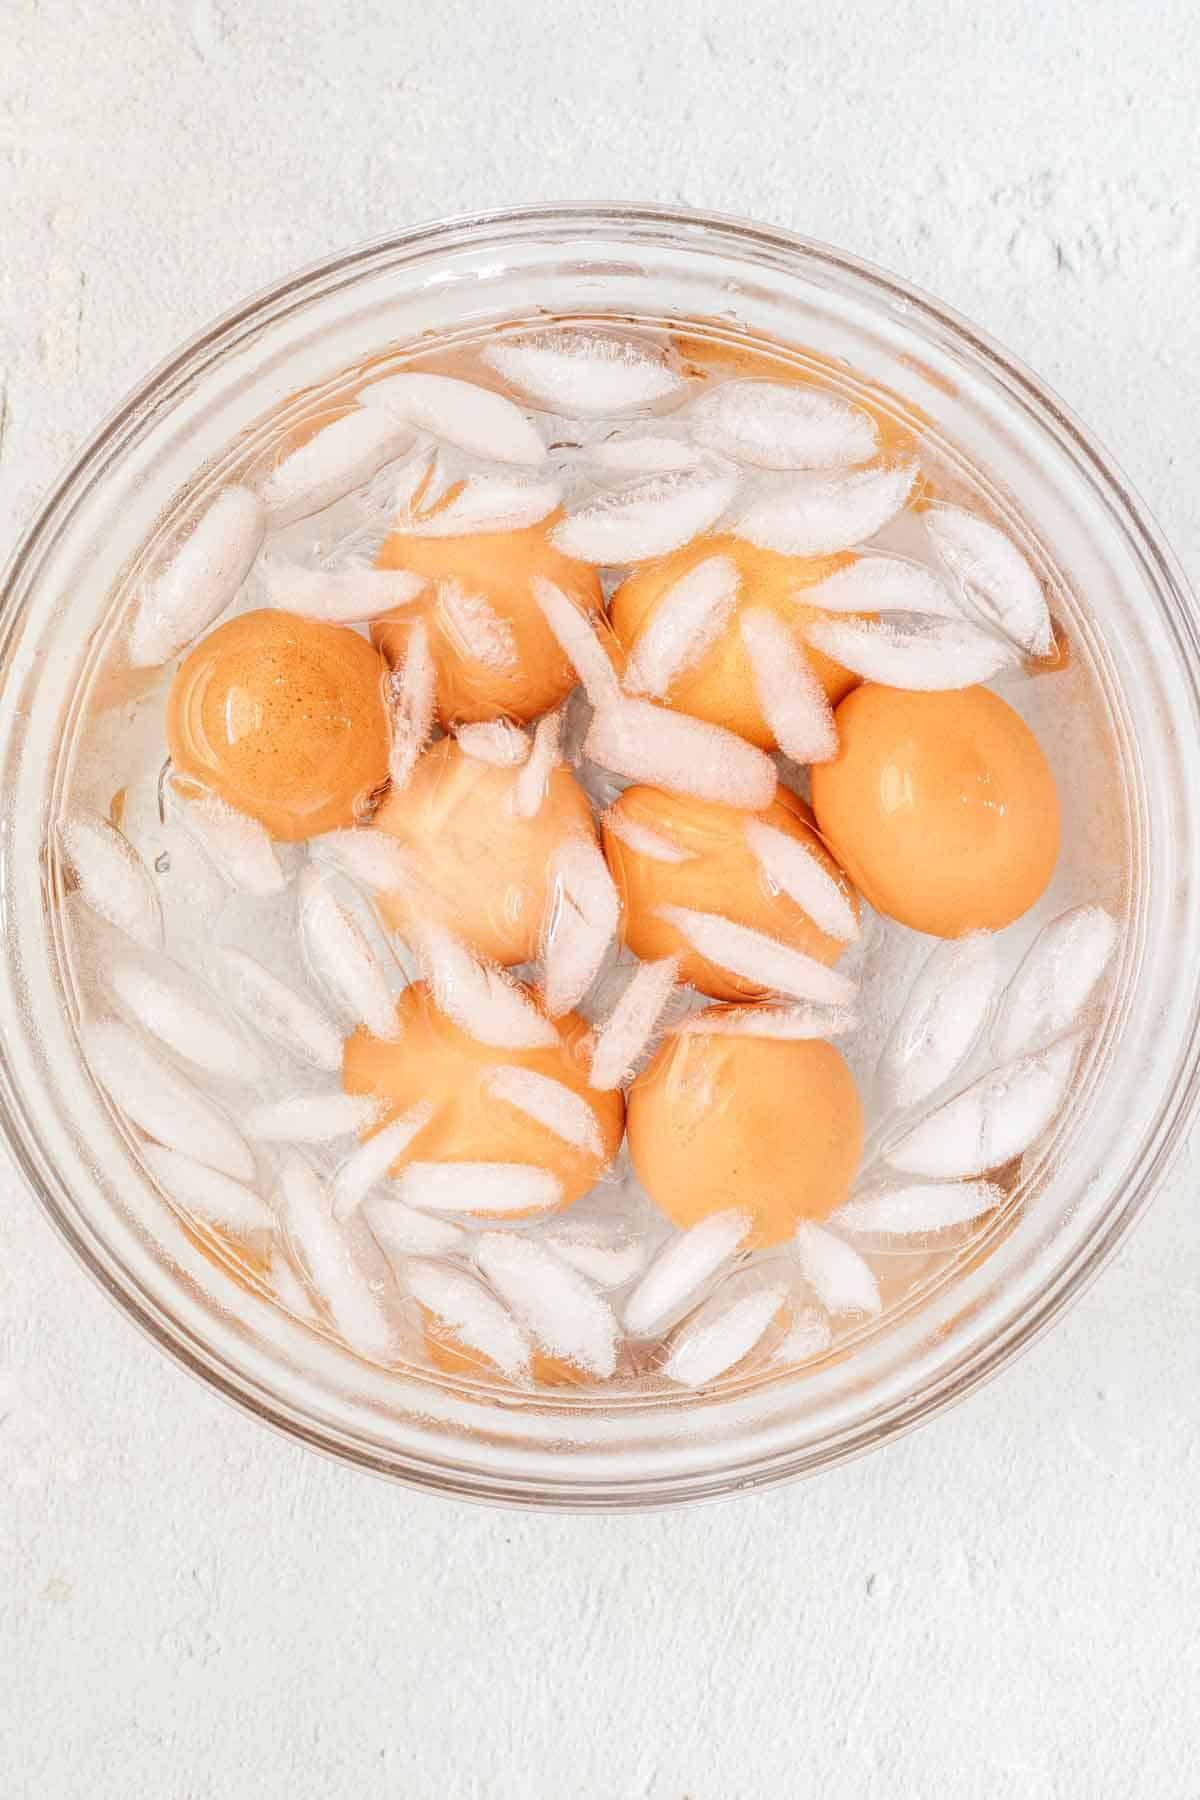 Boiled eggs being cooled in bowl of ice and cold water.